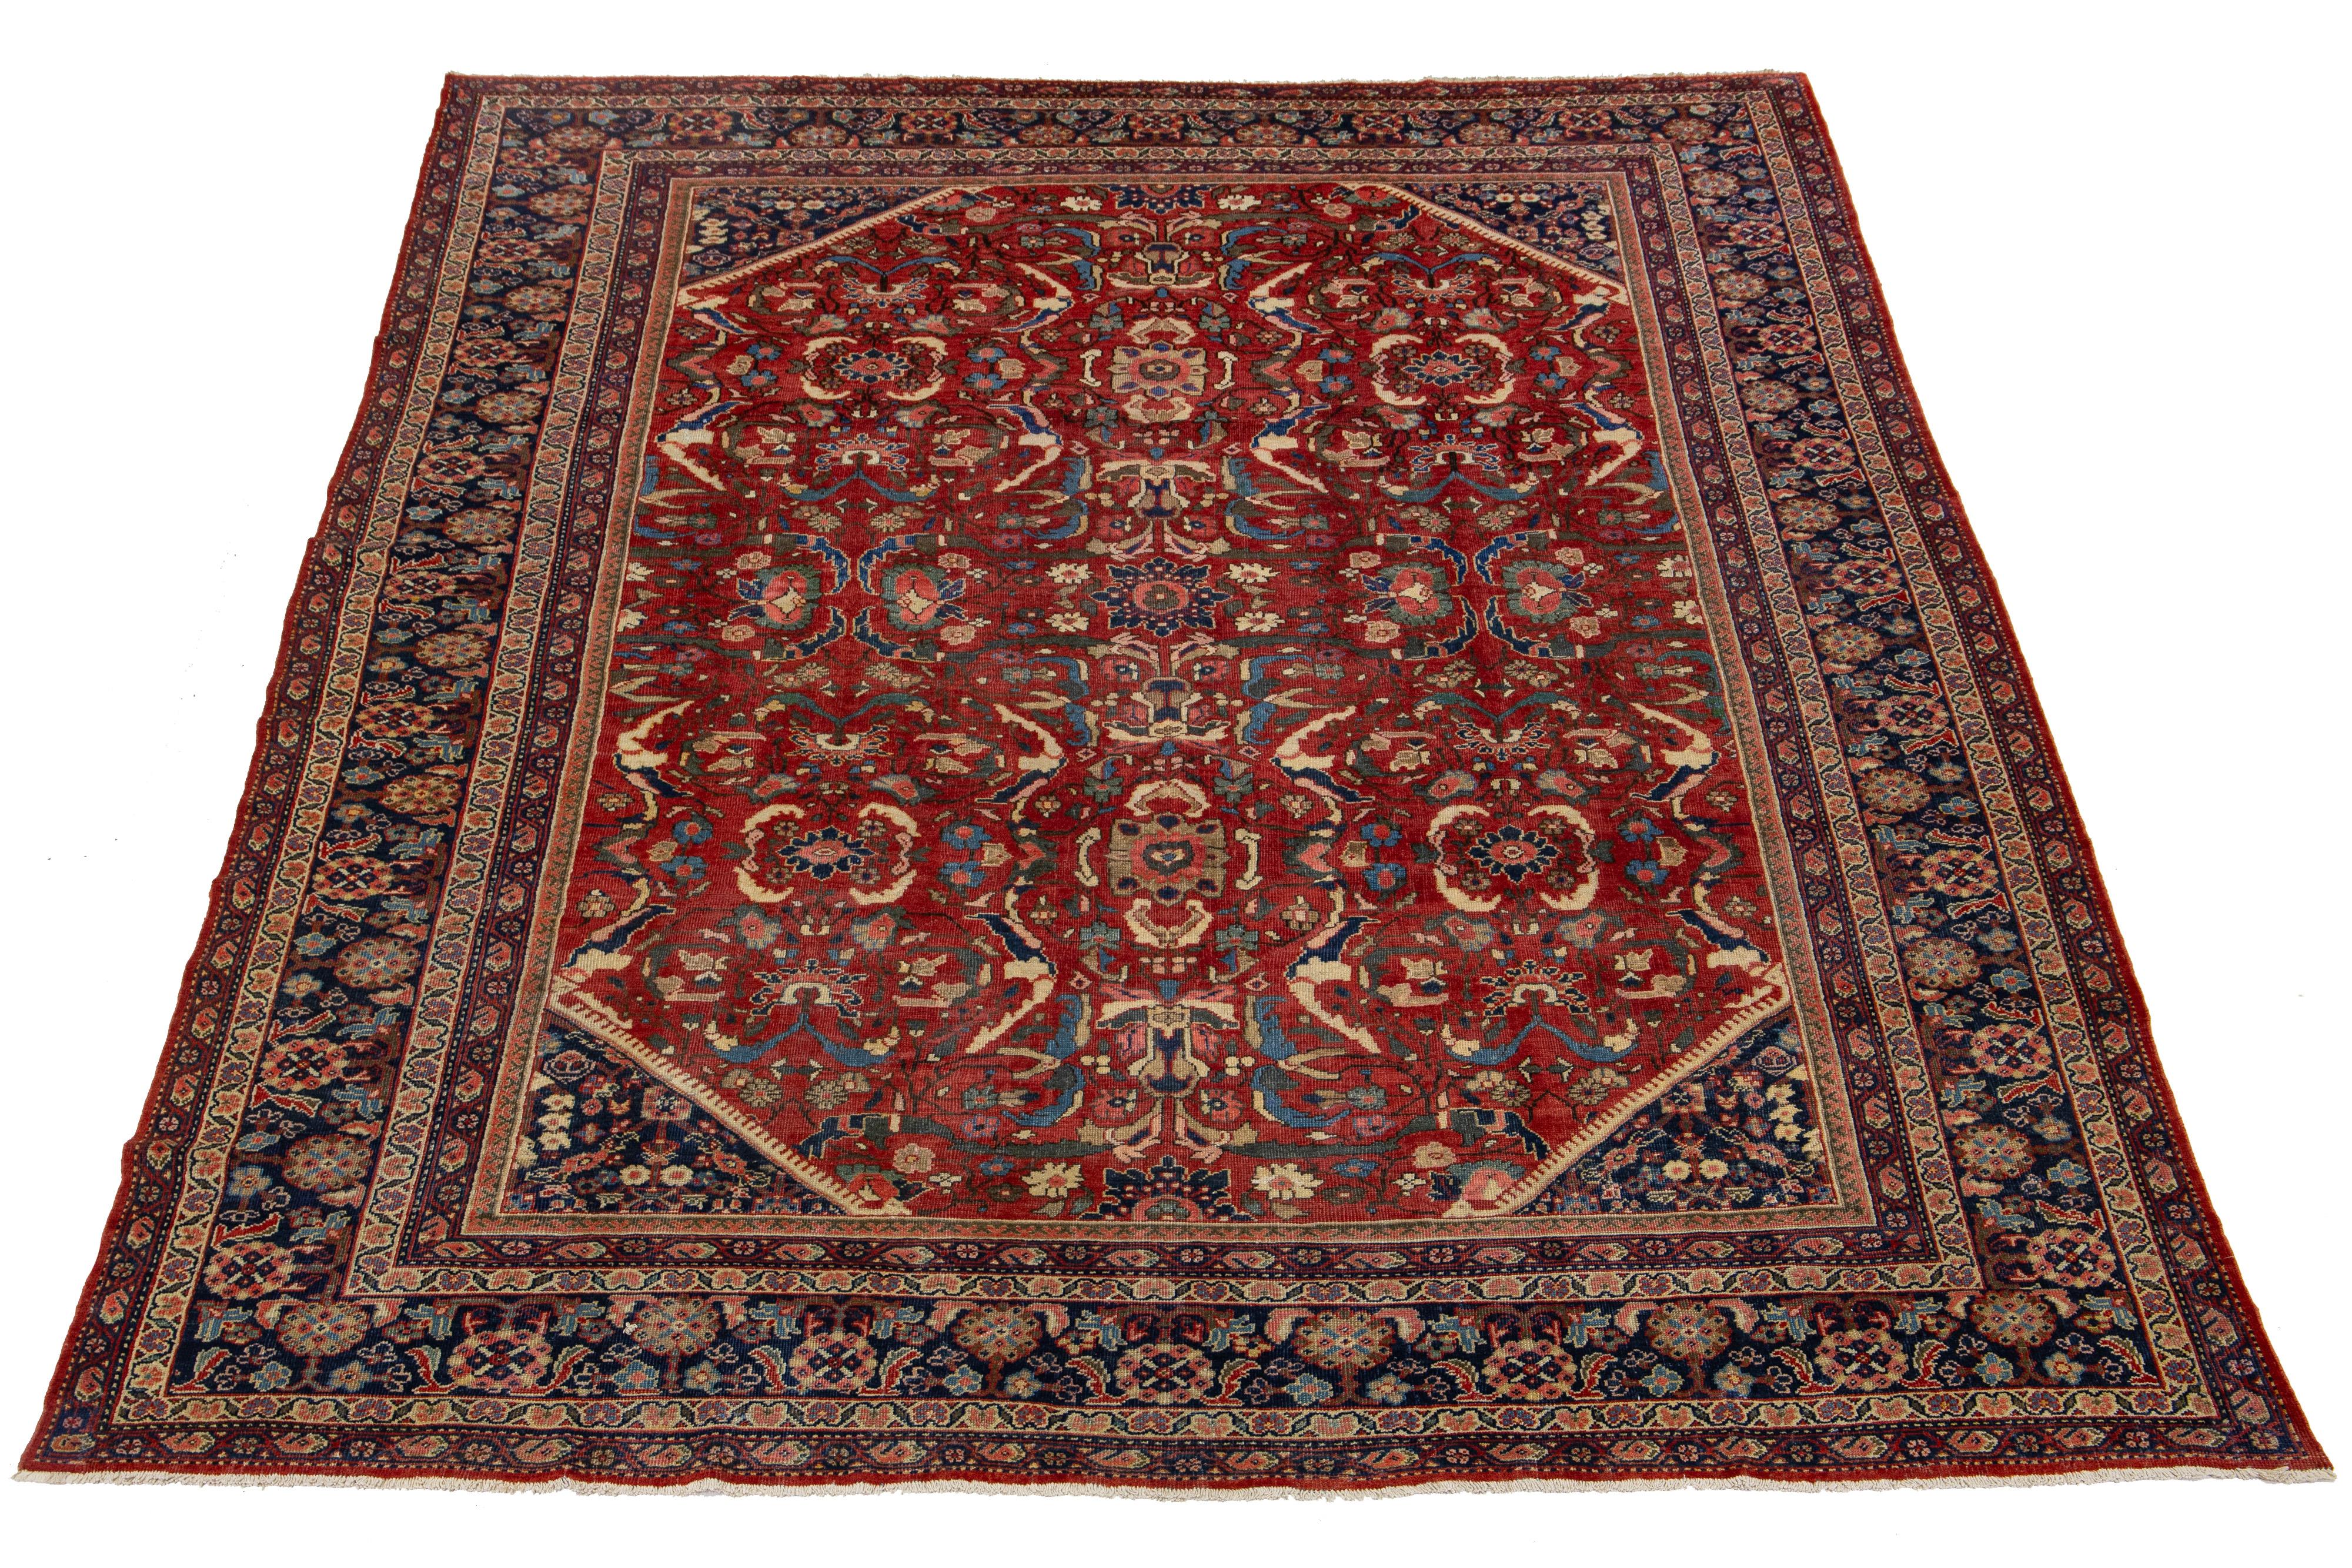 19th-century antique Mahal Persian Handmade Wool Rug with red field and multicolor floral Design. 

This rug measures 10' x 13'6